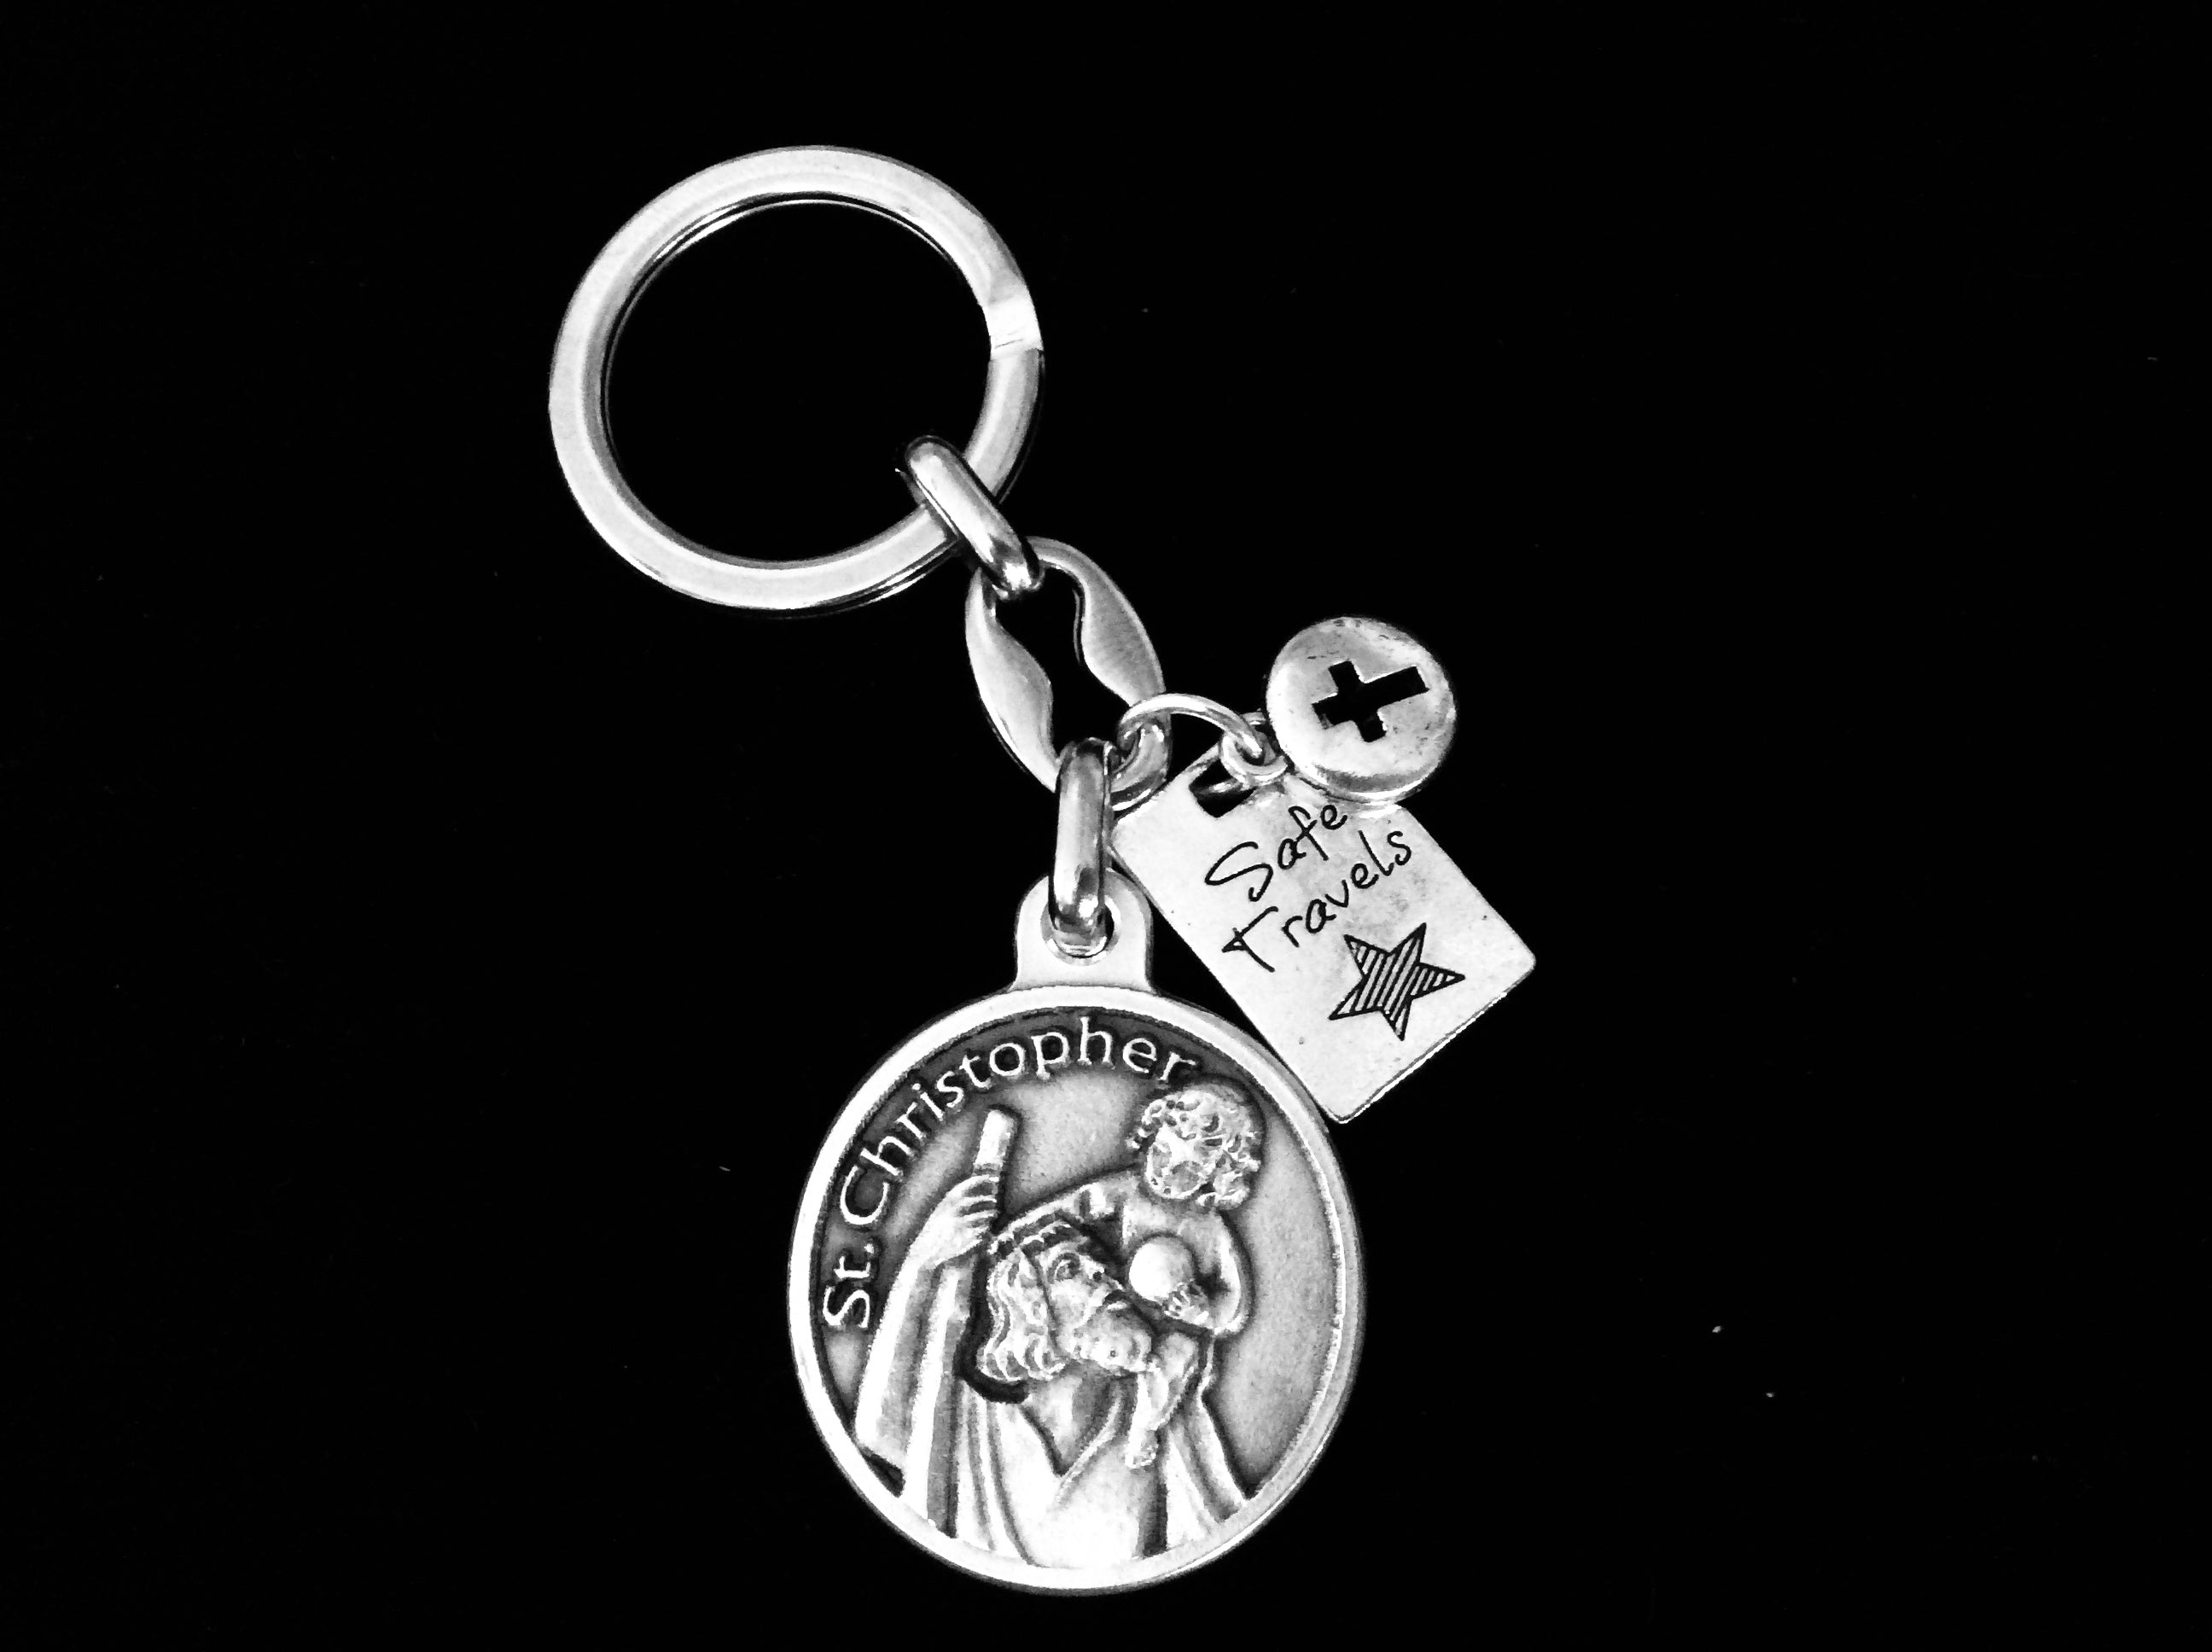 Jules Obsession Safe Travels Saint Christopher Patron of Travelers Key Chain Medal Silver Key Ring Protection Gift Inspirational Jewelry